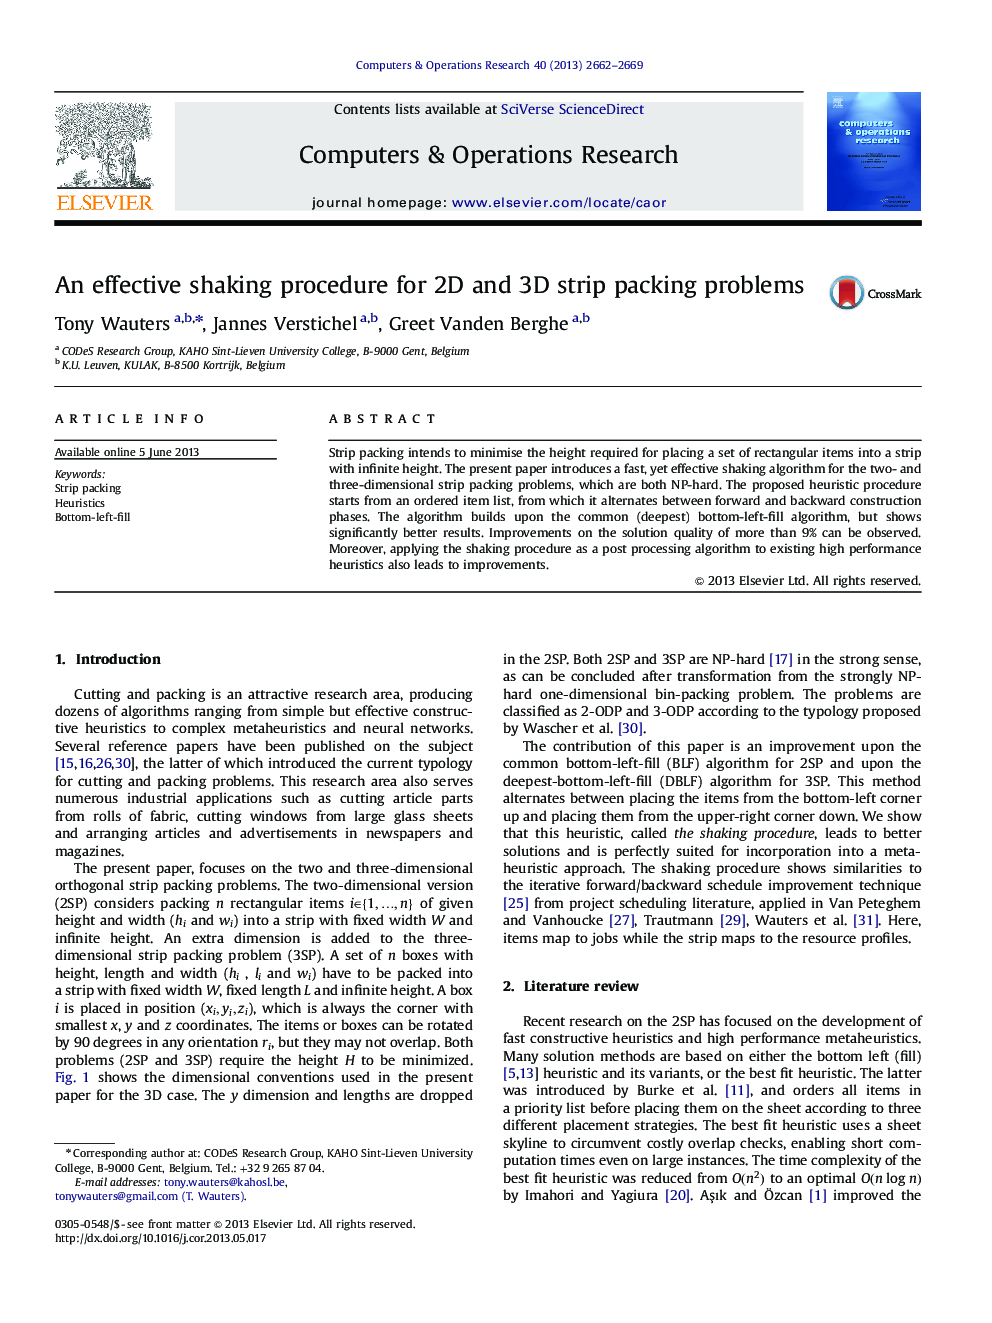 An effective shaking procedure for 2D and 3D strip packing problems